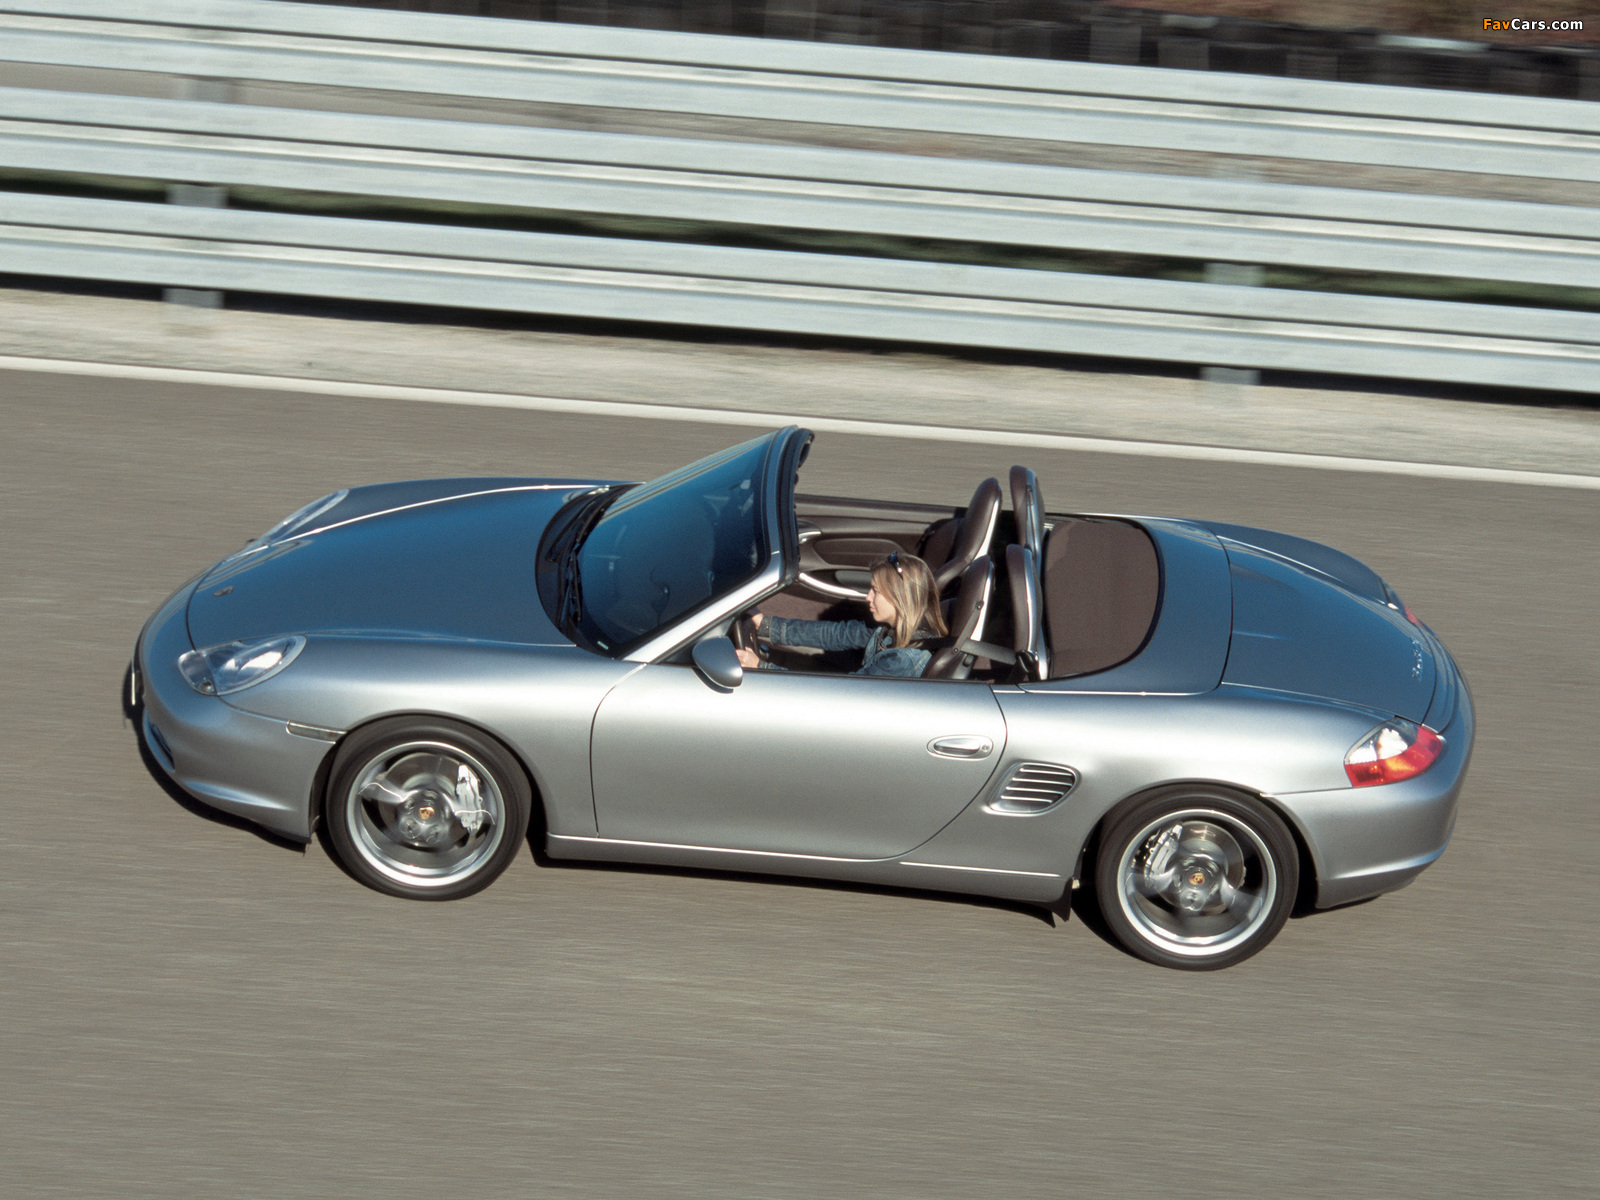 Porsche Boxster S 50 years 550 Spyder (986) 2004 pictures (1600 x 1200)